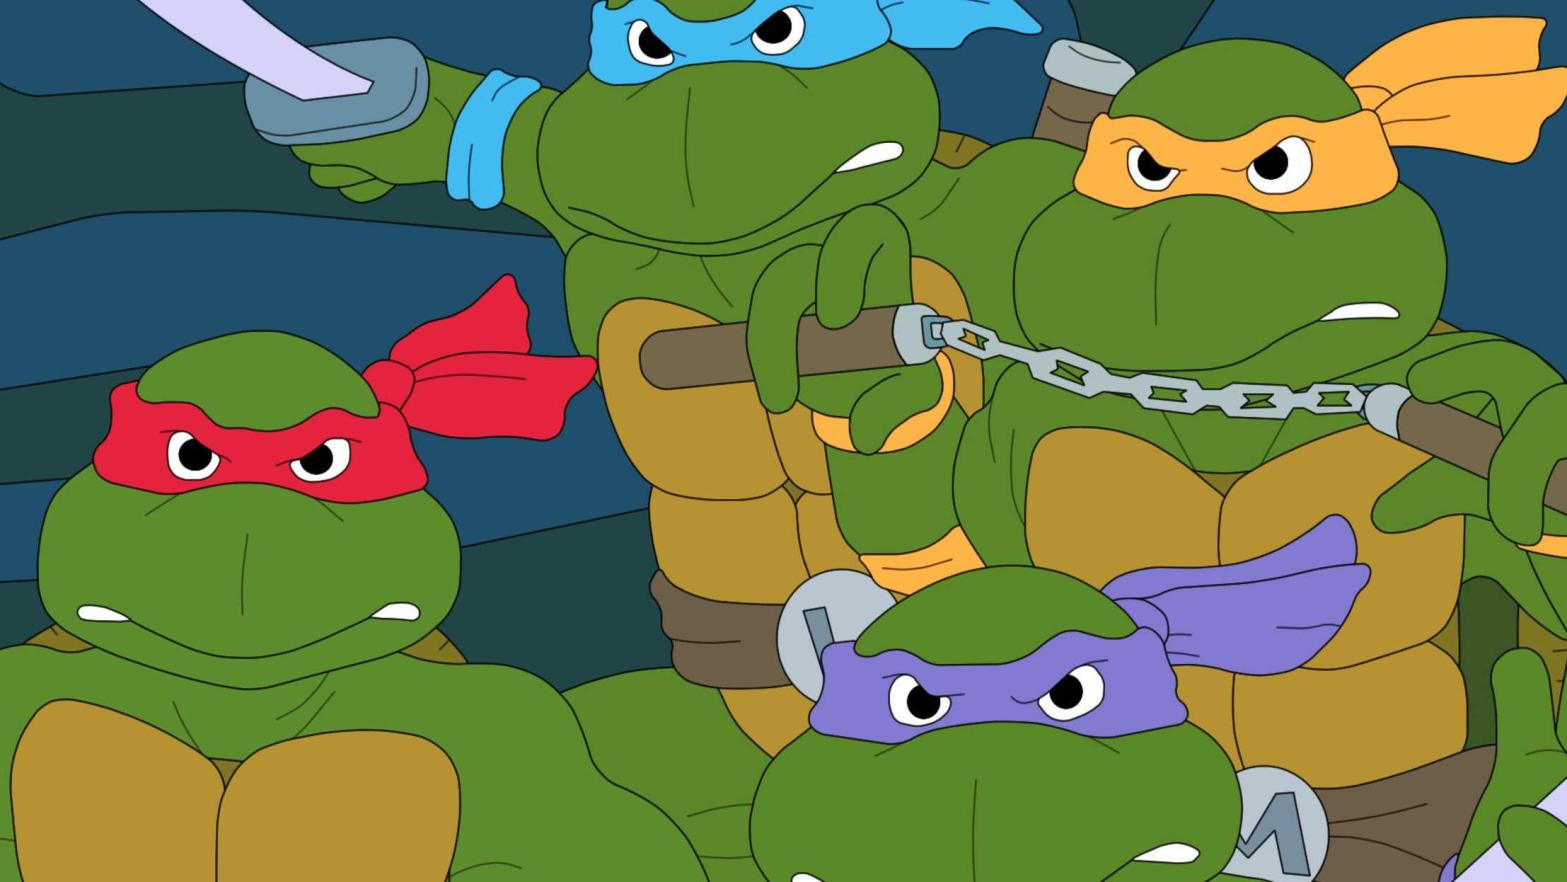 The Ninja Turtles, looking the way many of us remember them best. (Image: Nickelodeon)